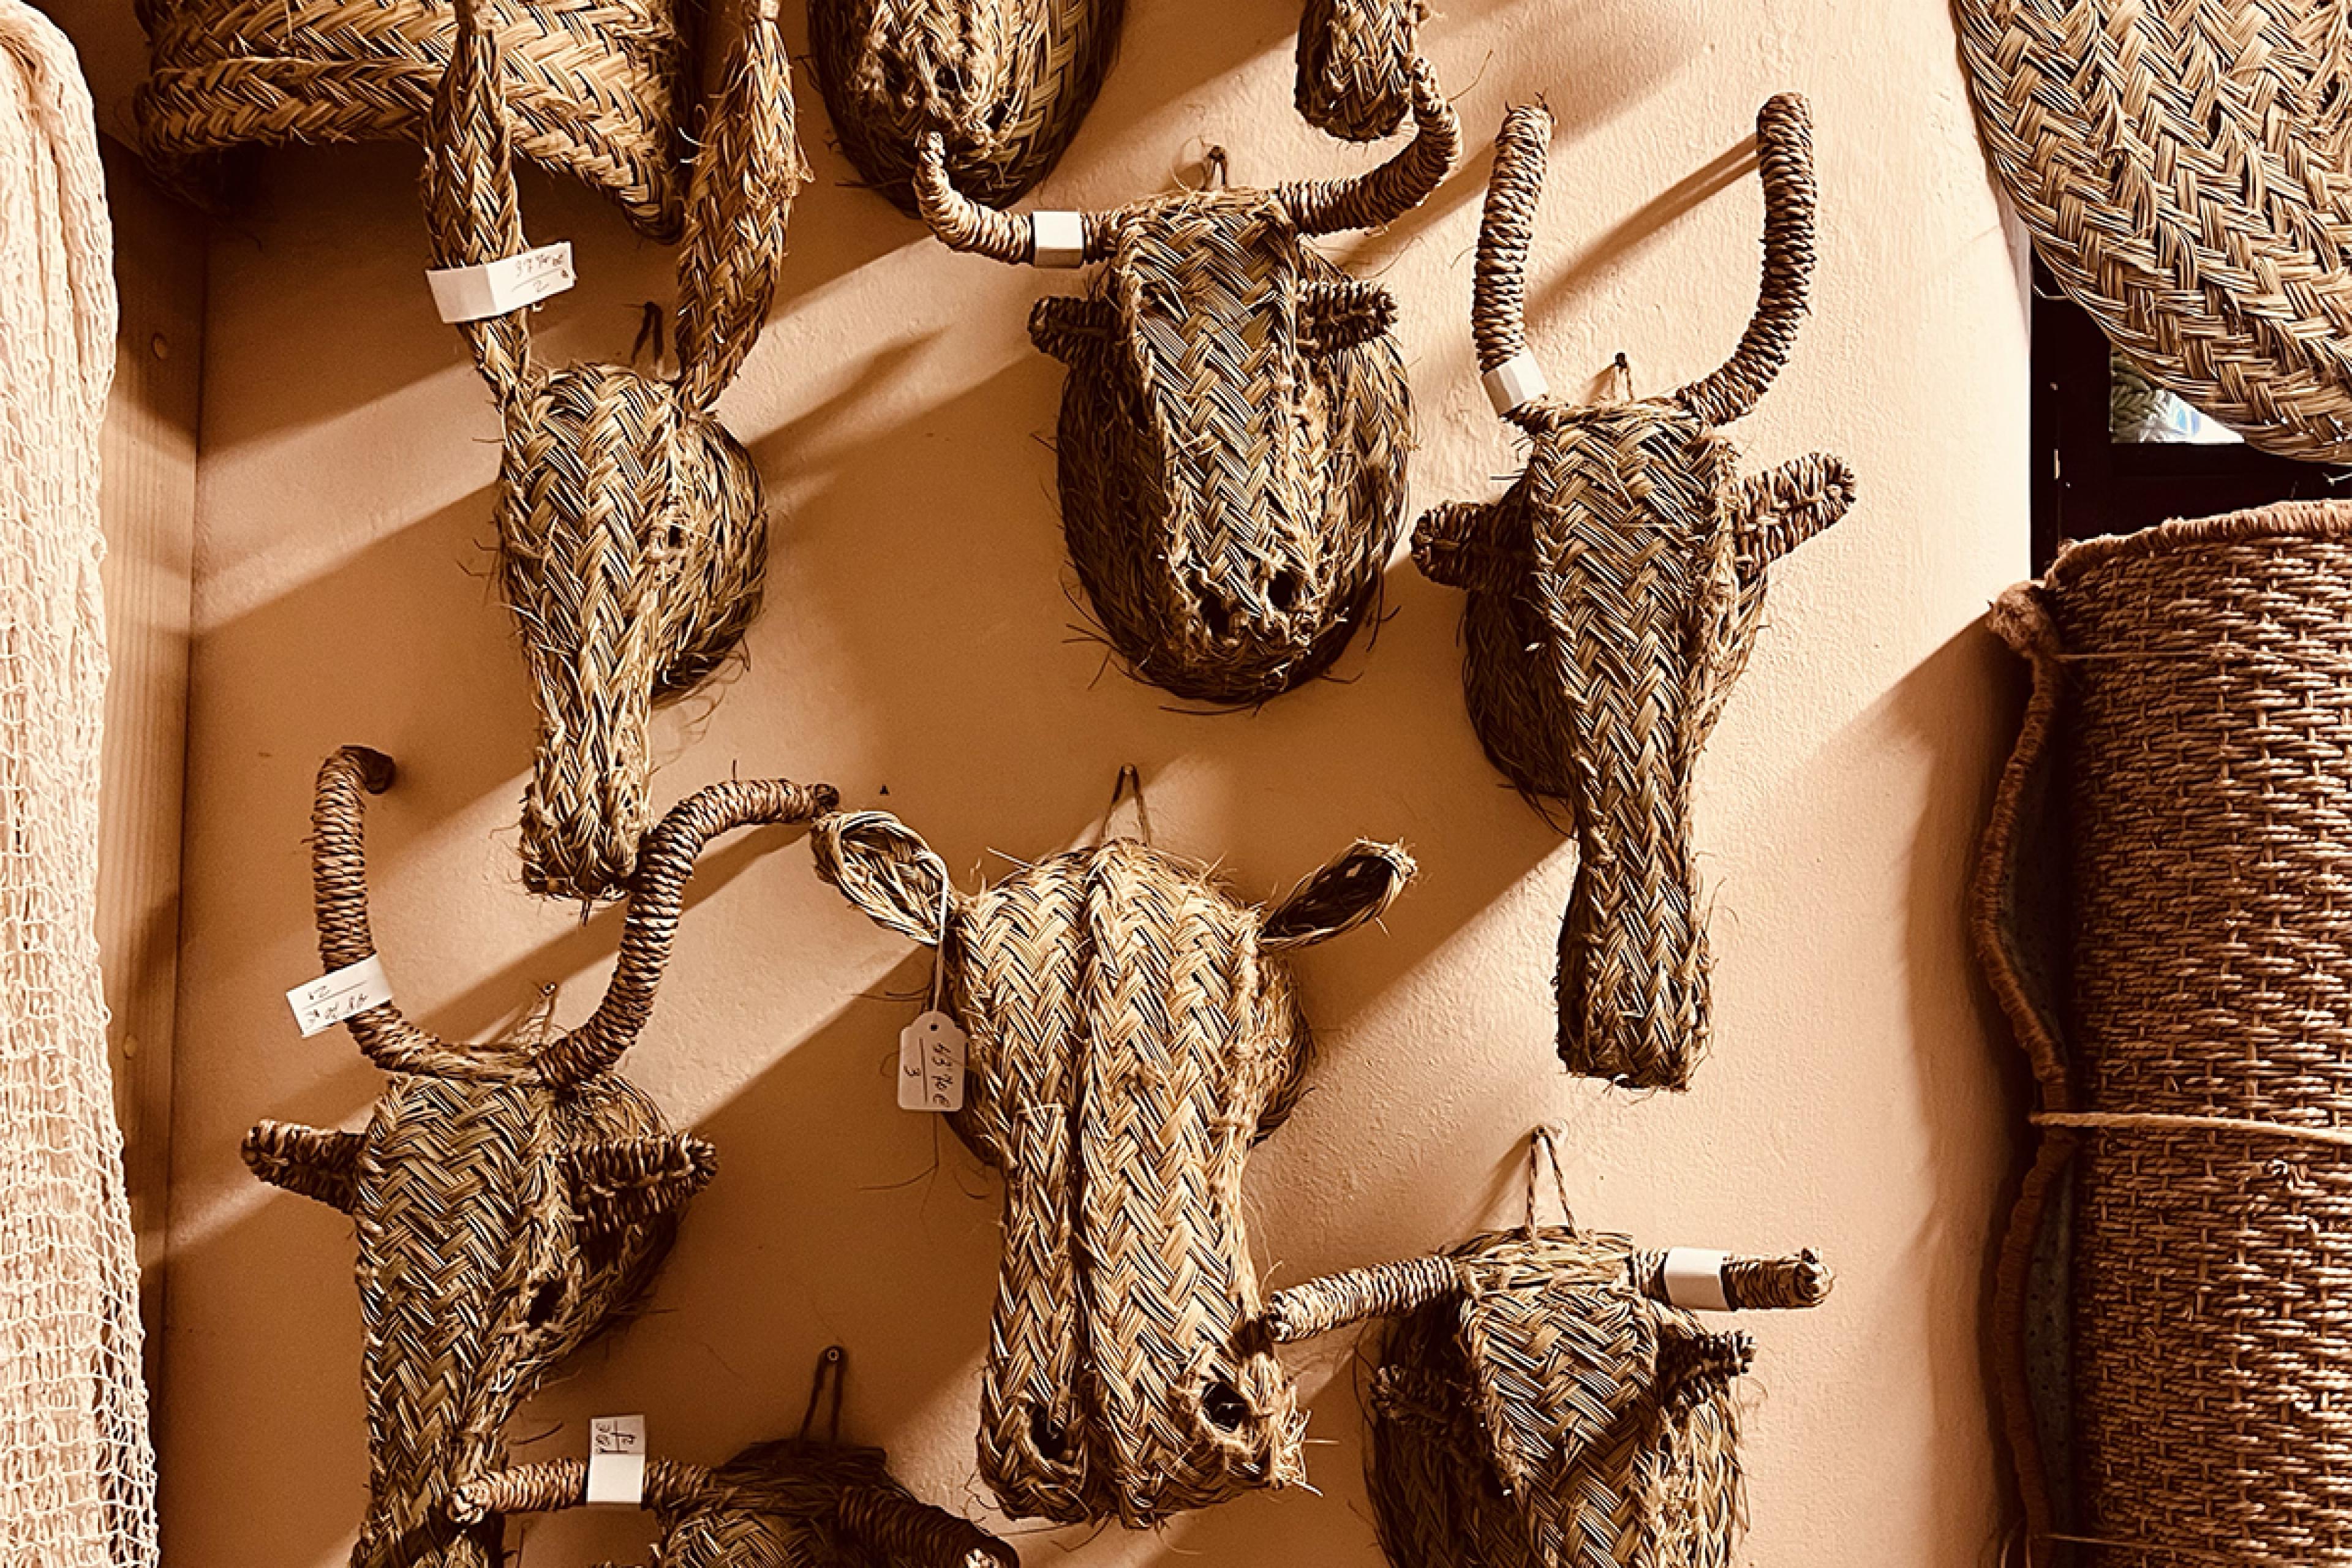 straw animal busts mimicking hunting trophies hanging on display in straw basket store